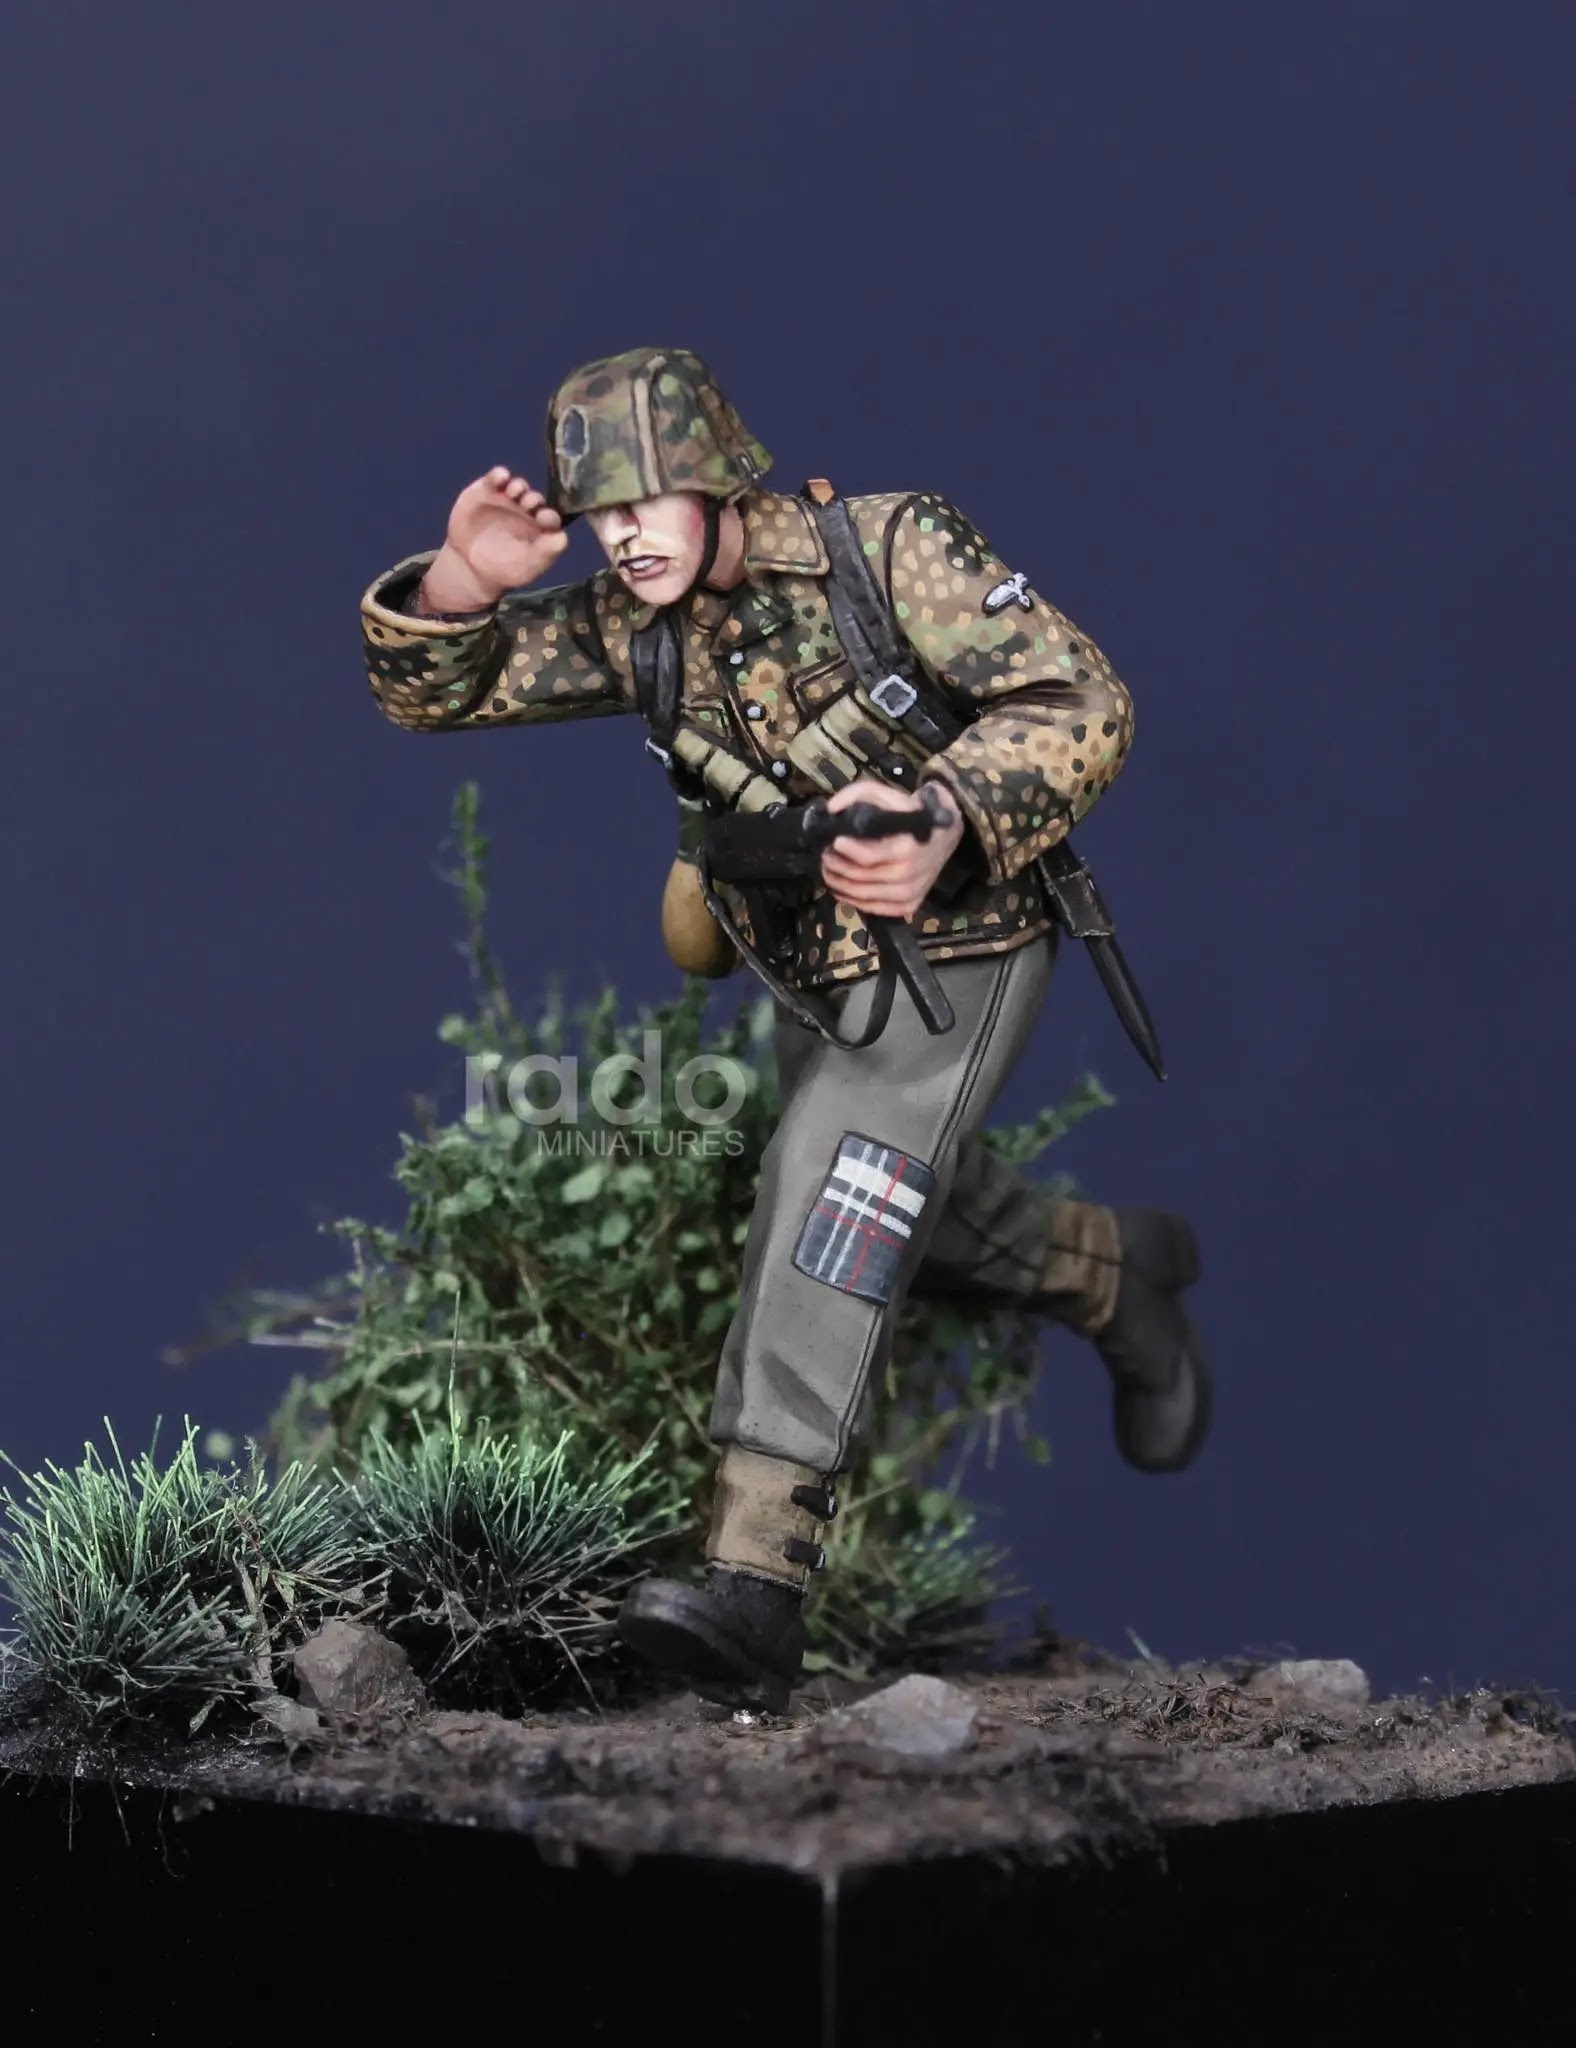 Under fire series From Rado Miniatures 1/35th scale